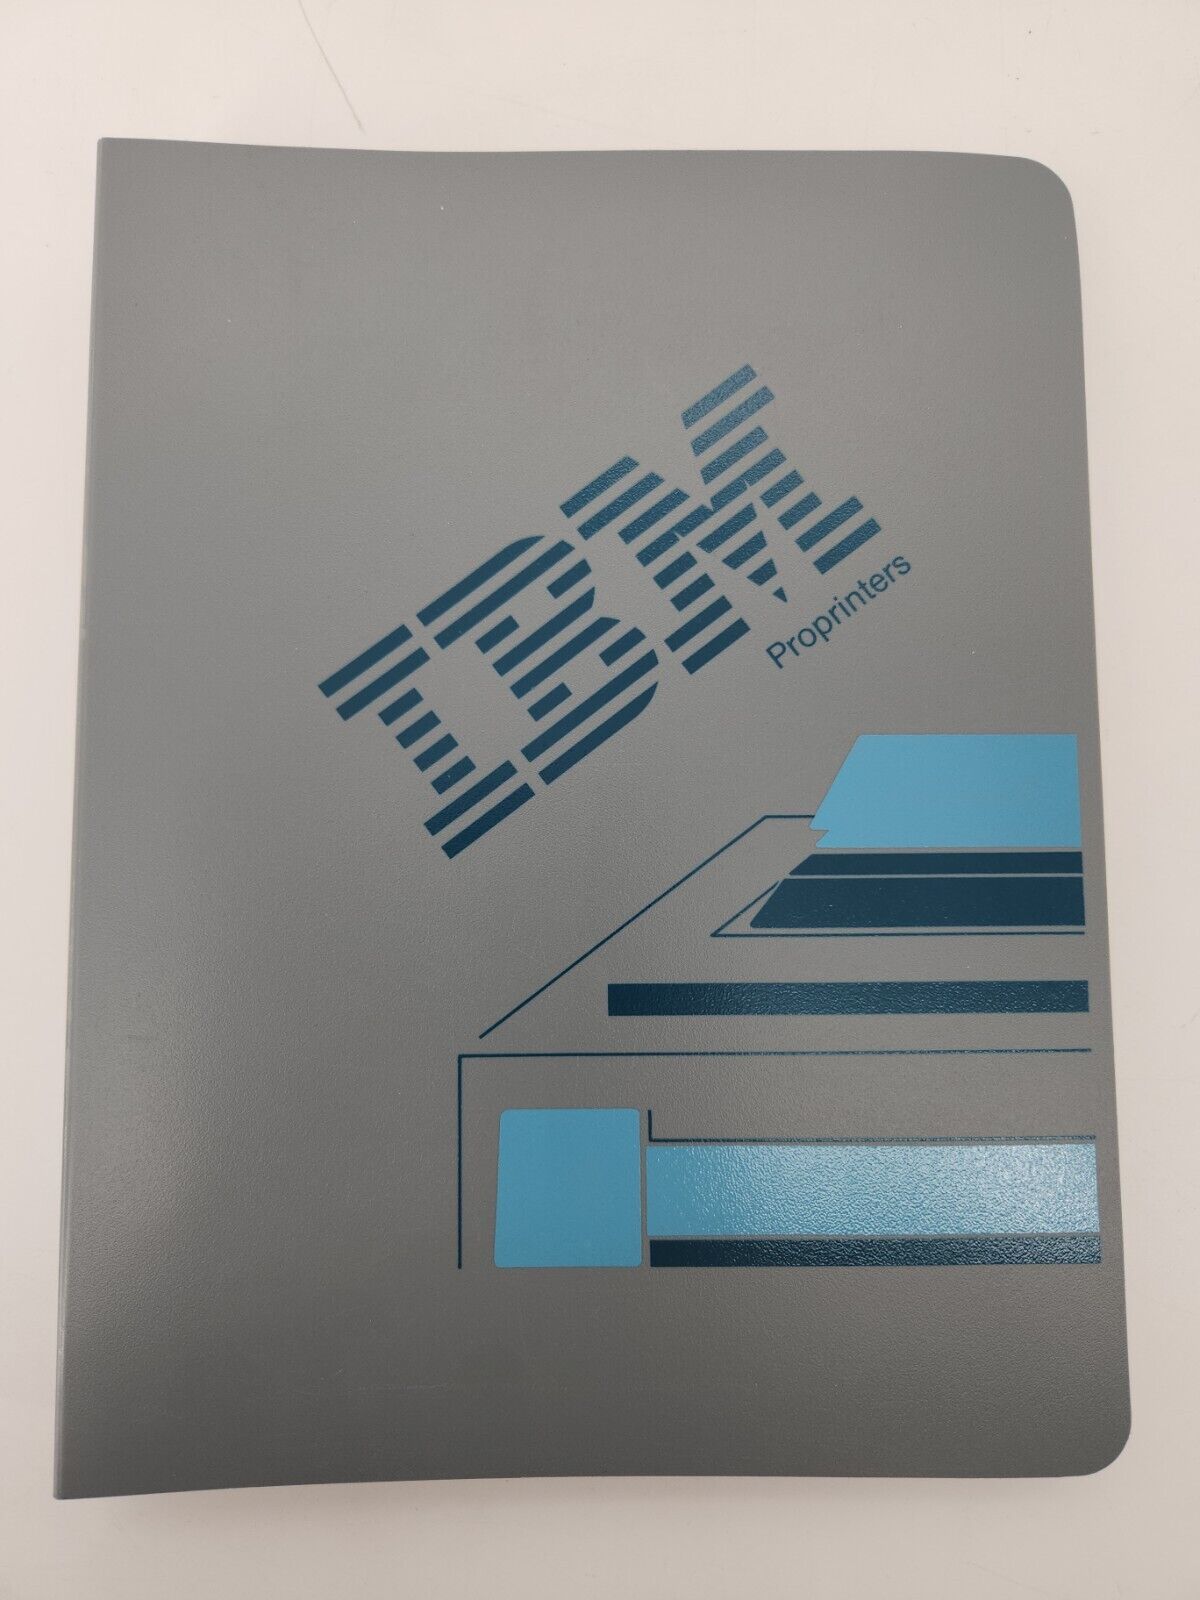 Vintage IBM Proprinter X24 and XL24 Guide to Operations  1987 1st edition